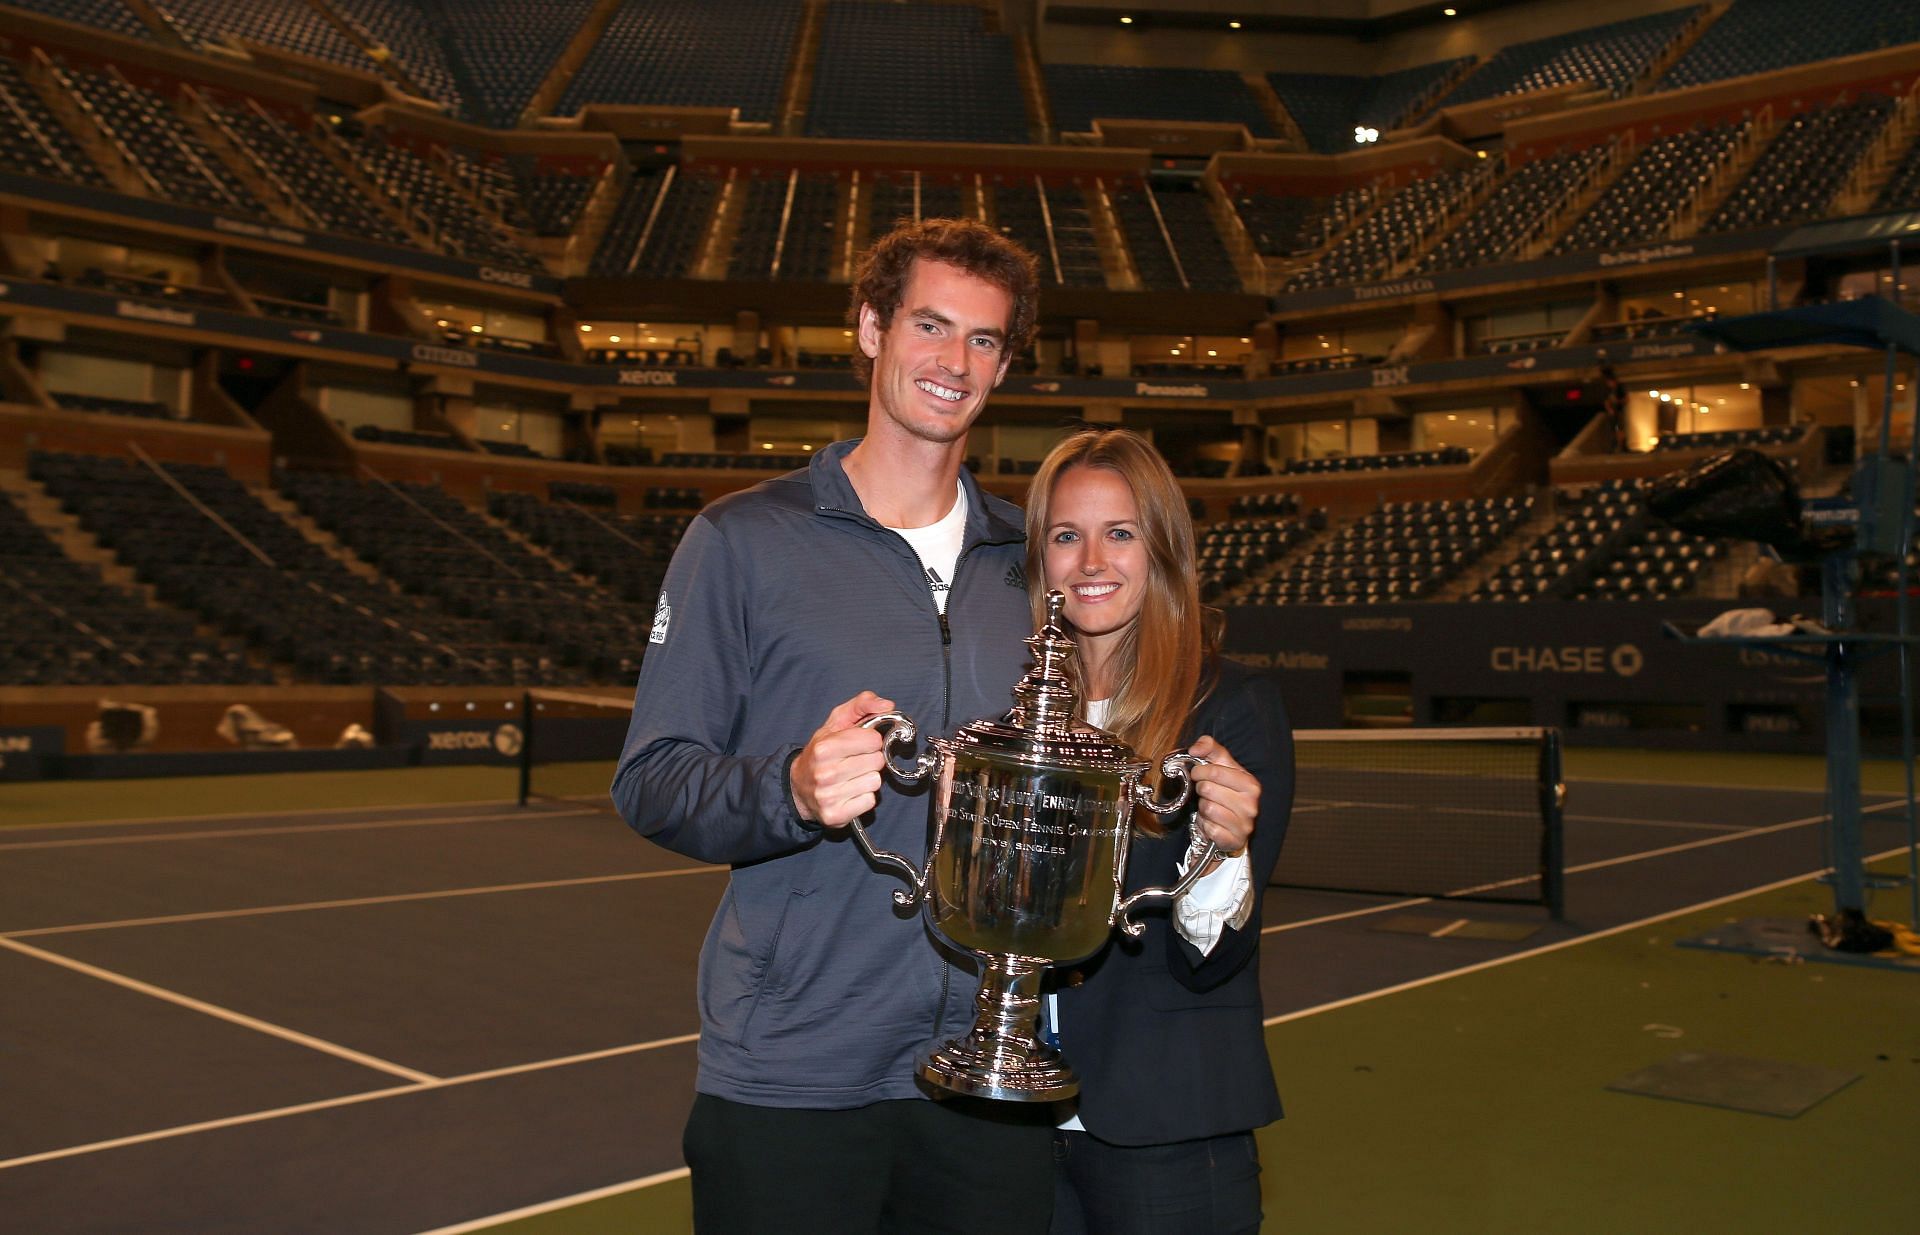 Andy Murray and Kim Sears at the 2012 US Open